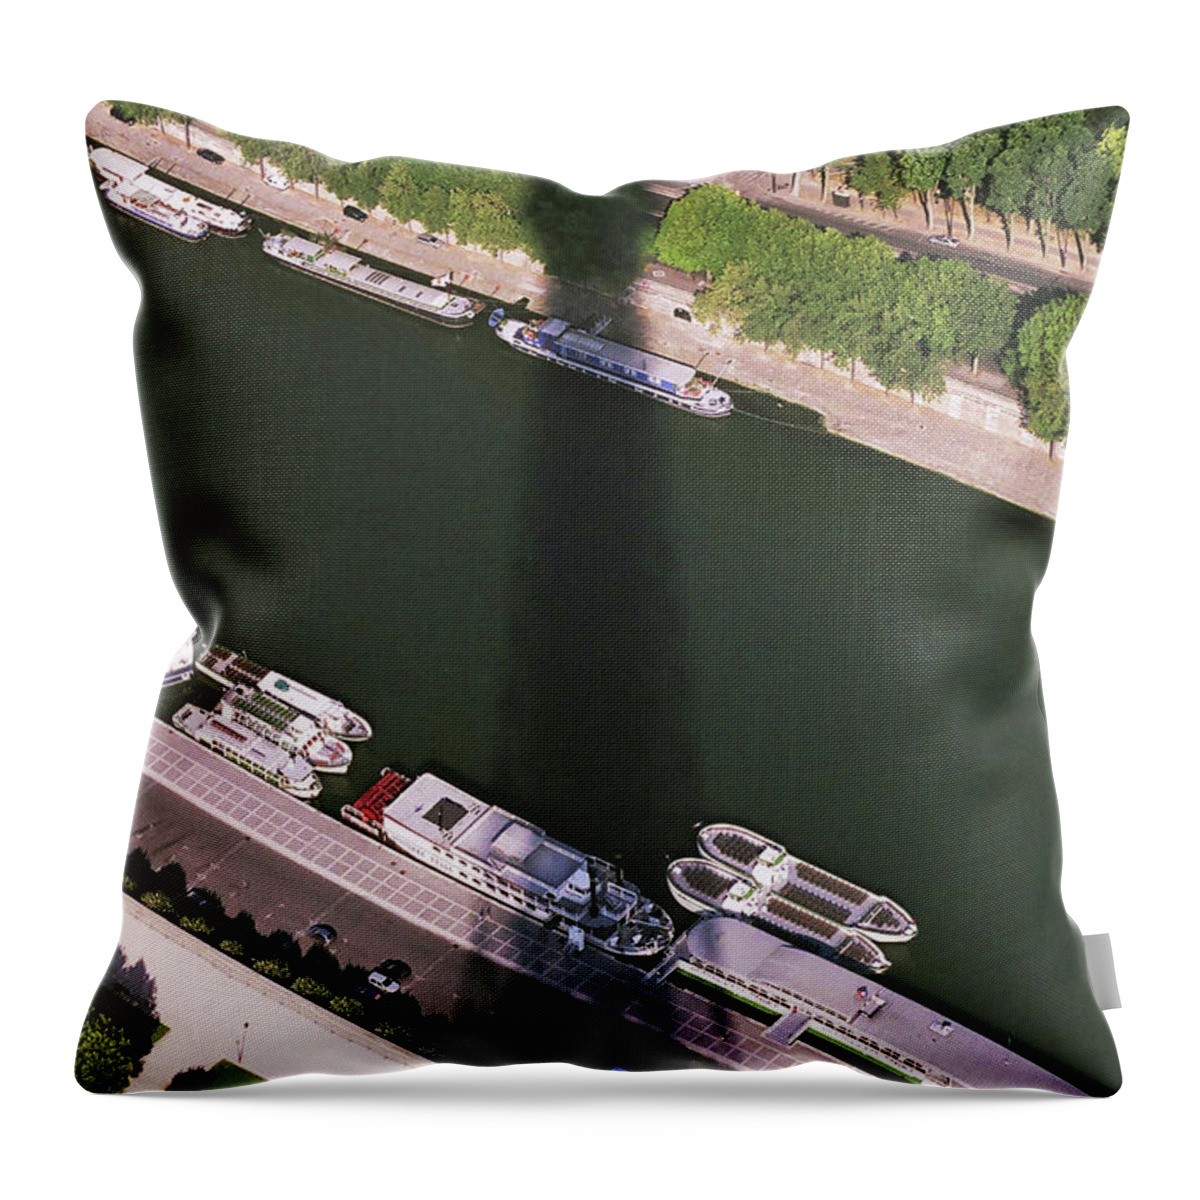 France Throw Pillow featuring the photograph The Shadow of the Tower by Jim Feldman